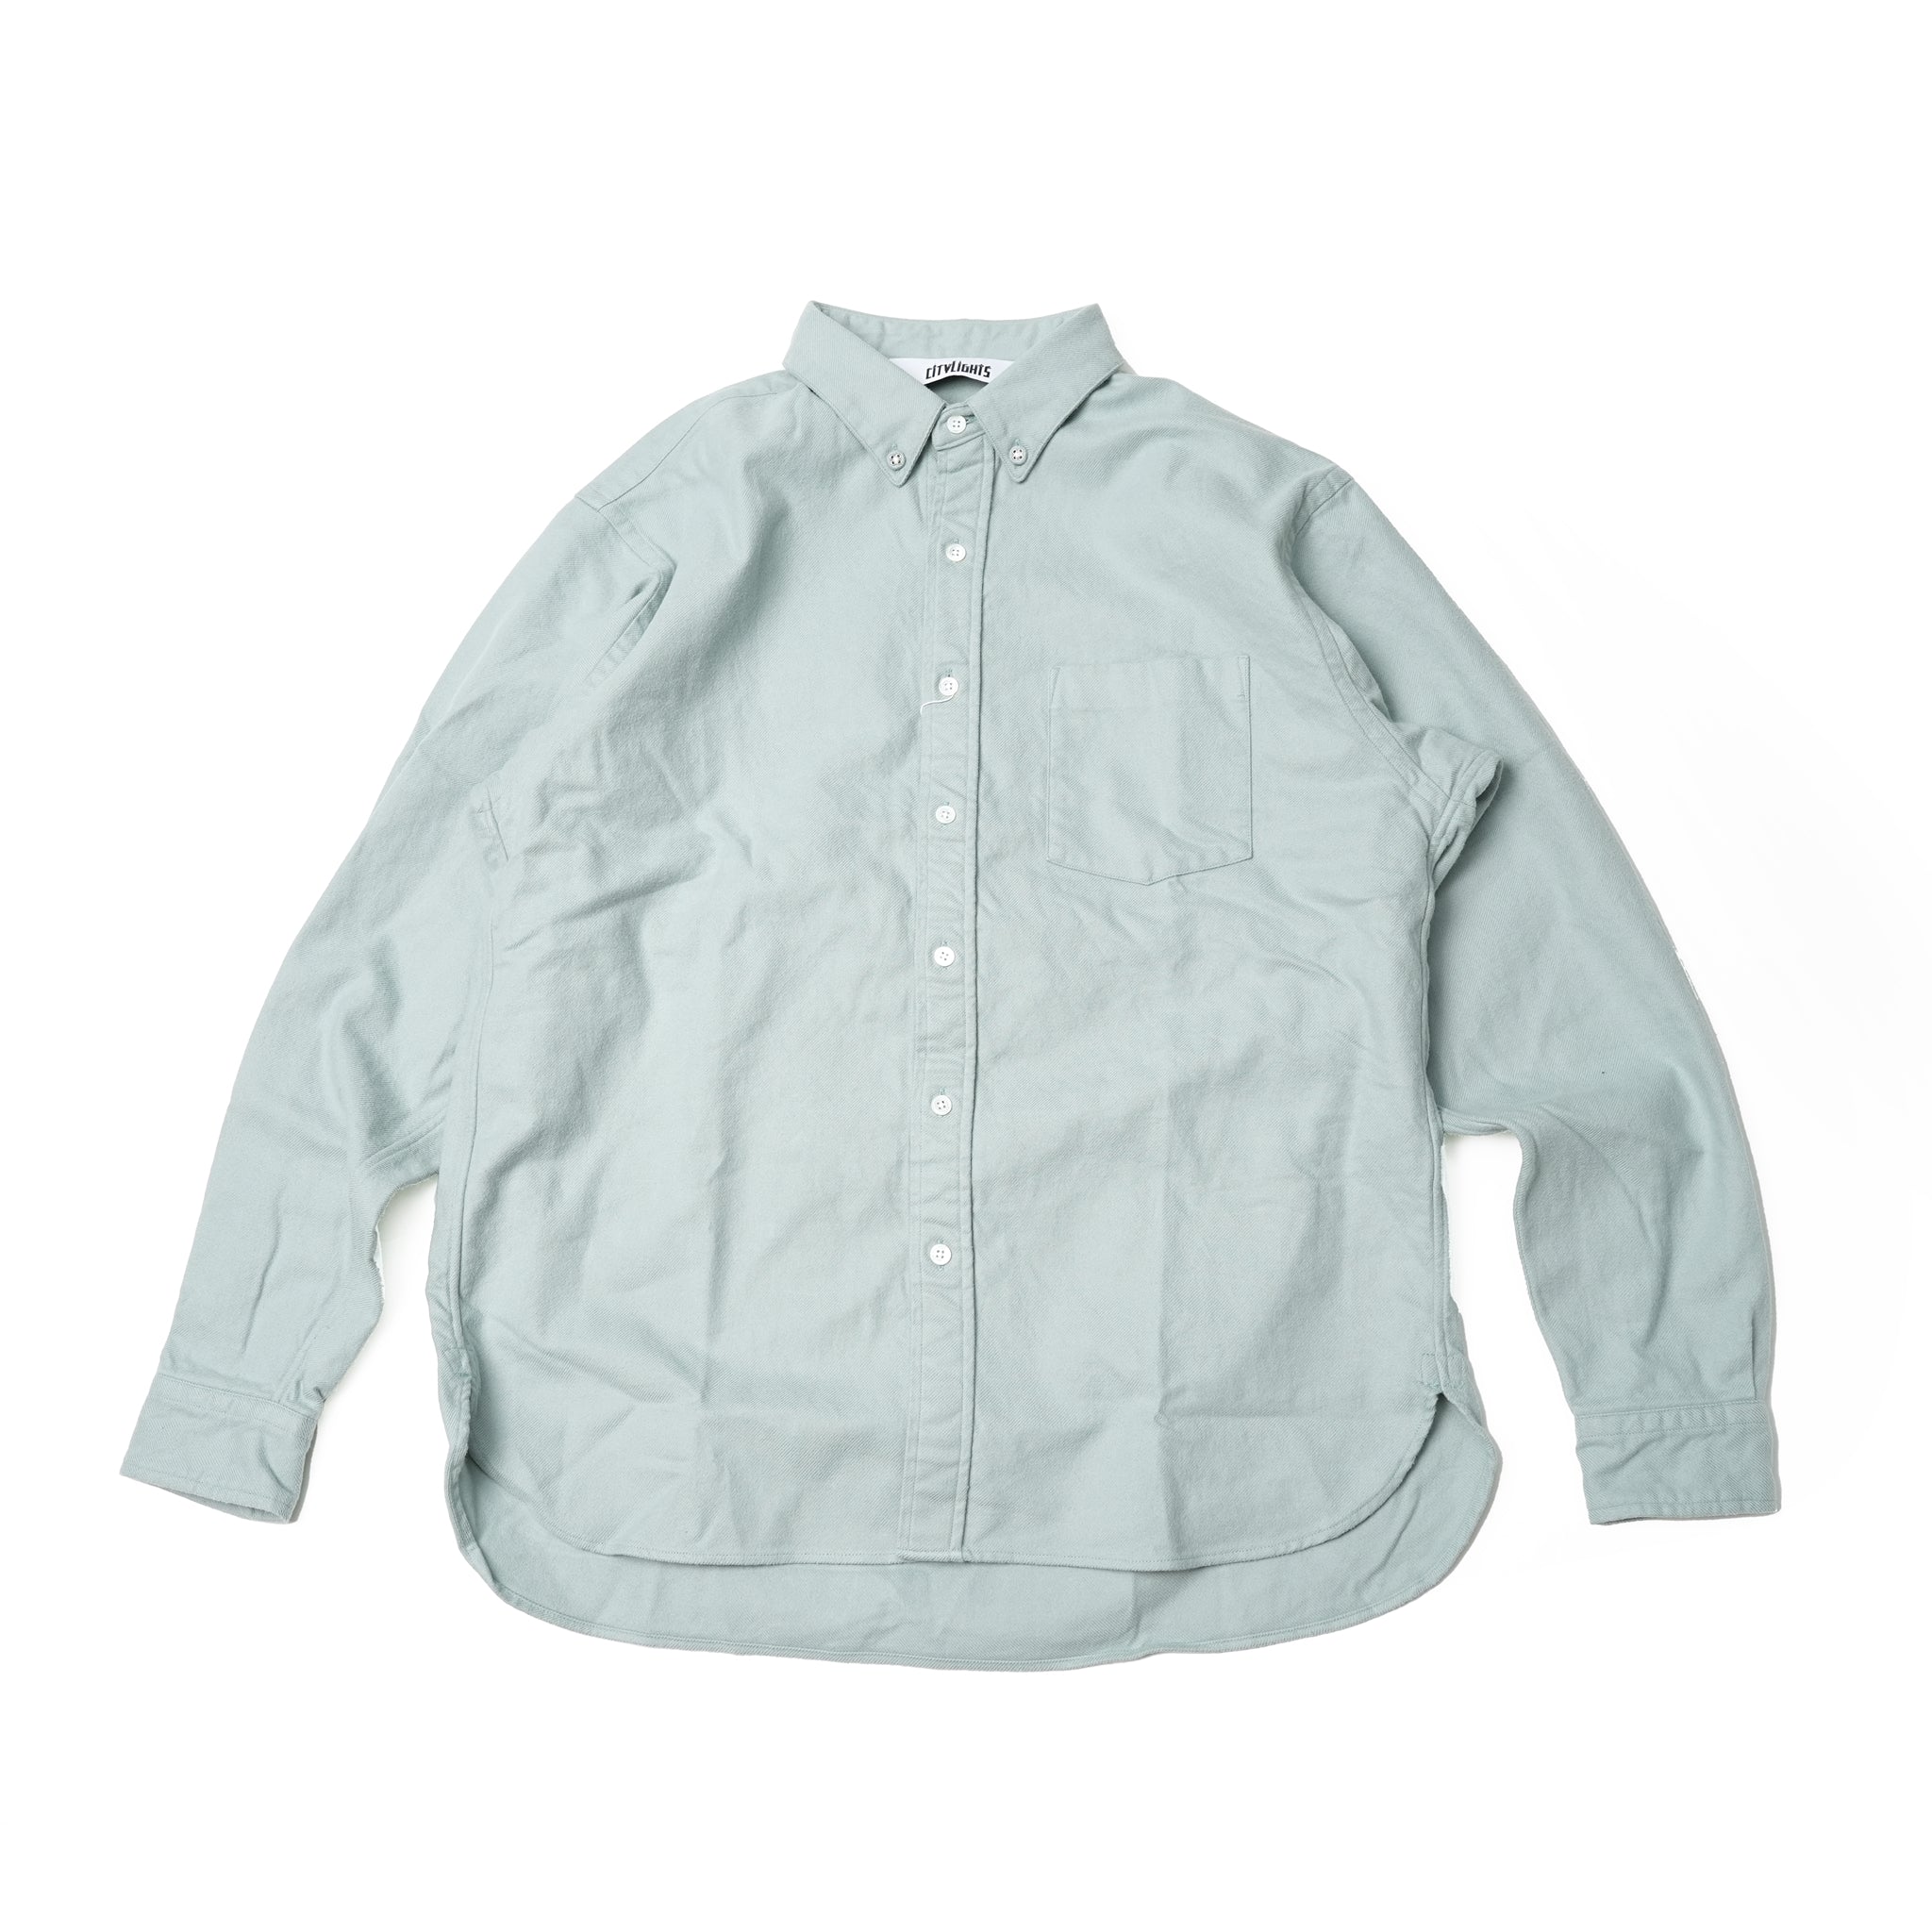 Name: BD SHIRTS | Color:Pistachio | Size:Regular/Tall 【CITYLIGHTS PRODUCTS_シティライツプロダクツ】